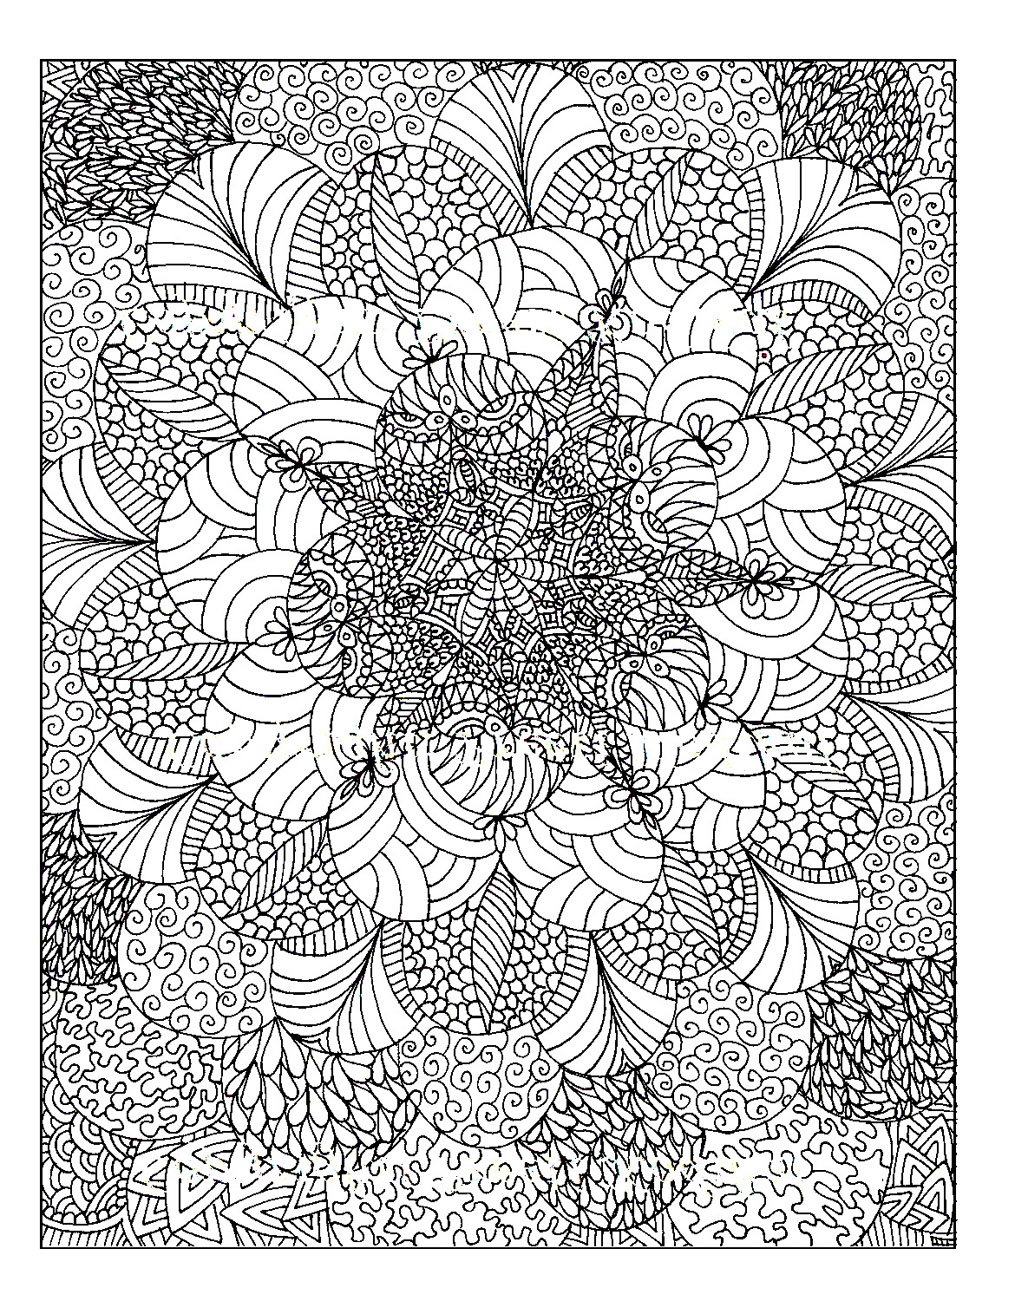 Intricate coloring page consistin of irregular circles composed of various patterns